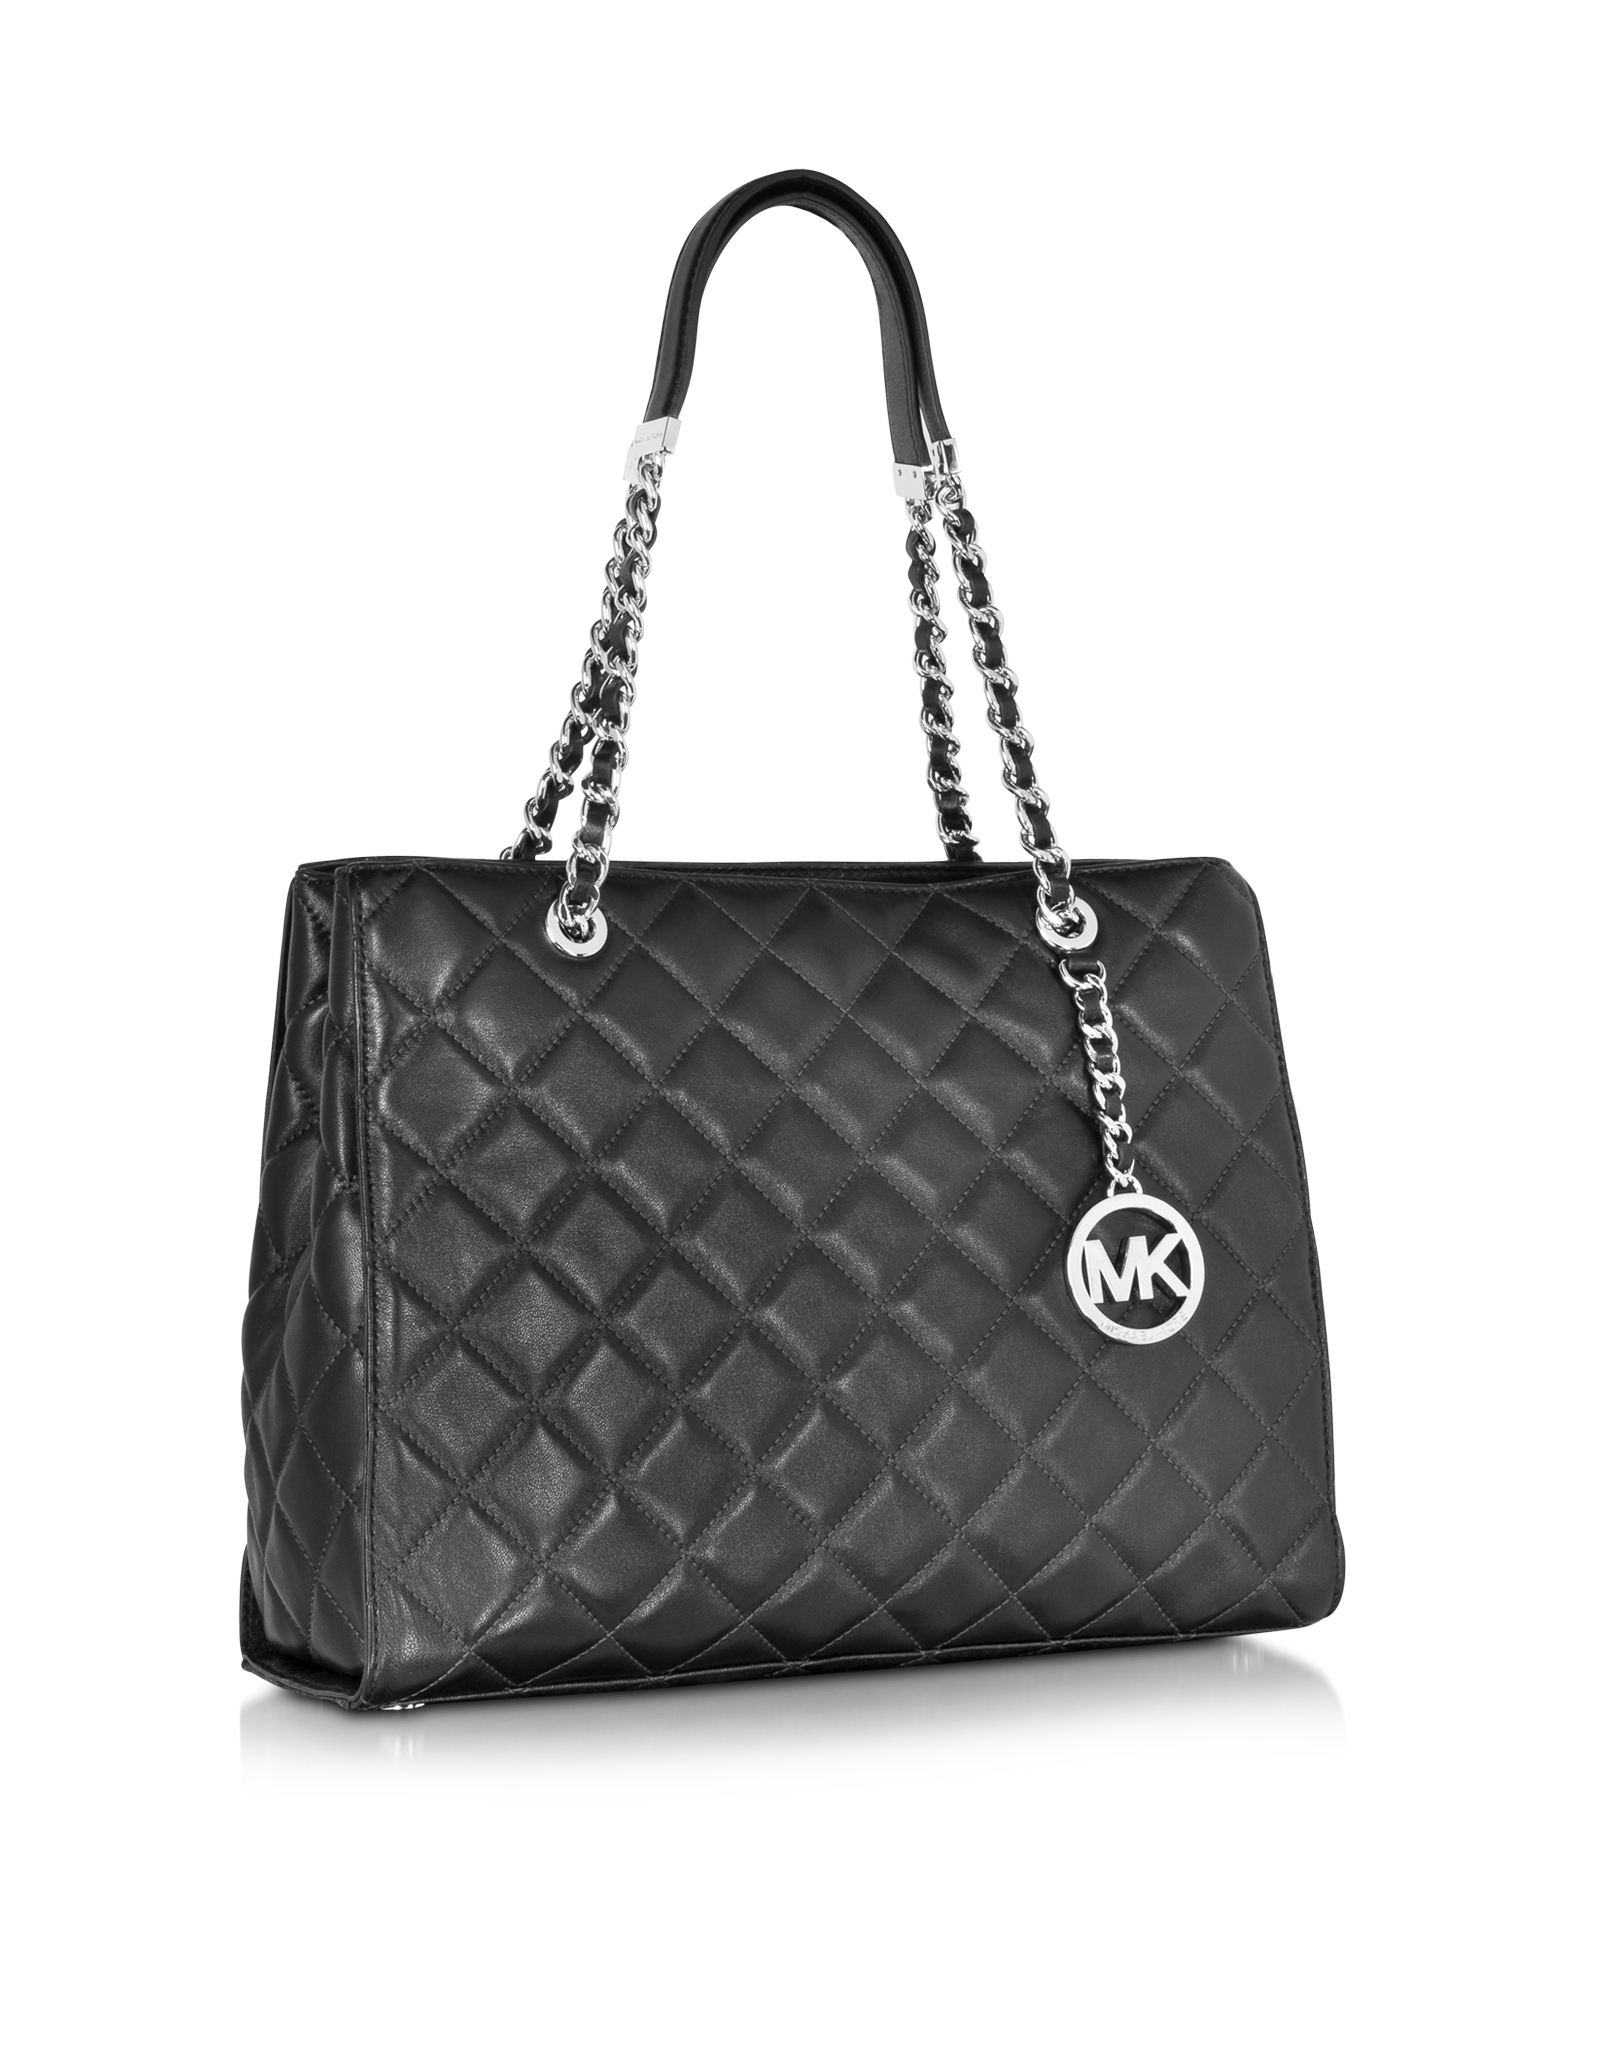 Michael Kors Susannah Large Black Quilted Leather Tote Bag - Lyst